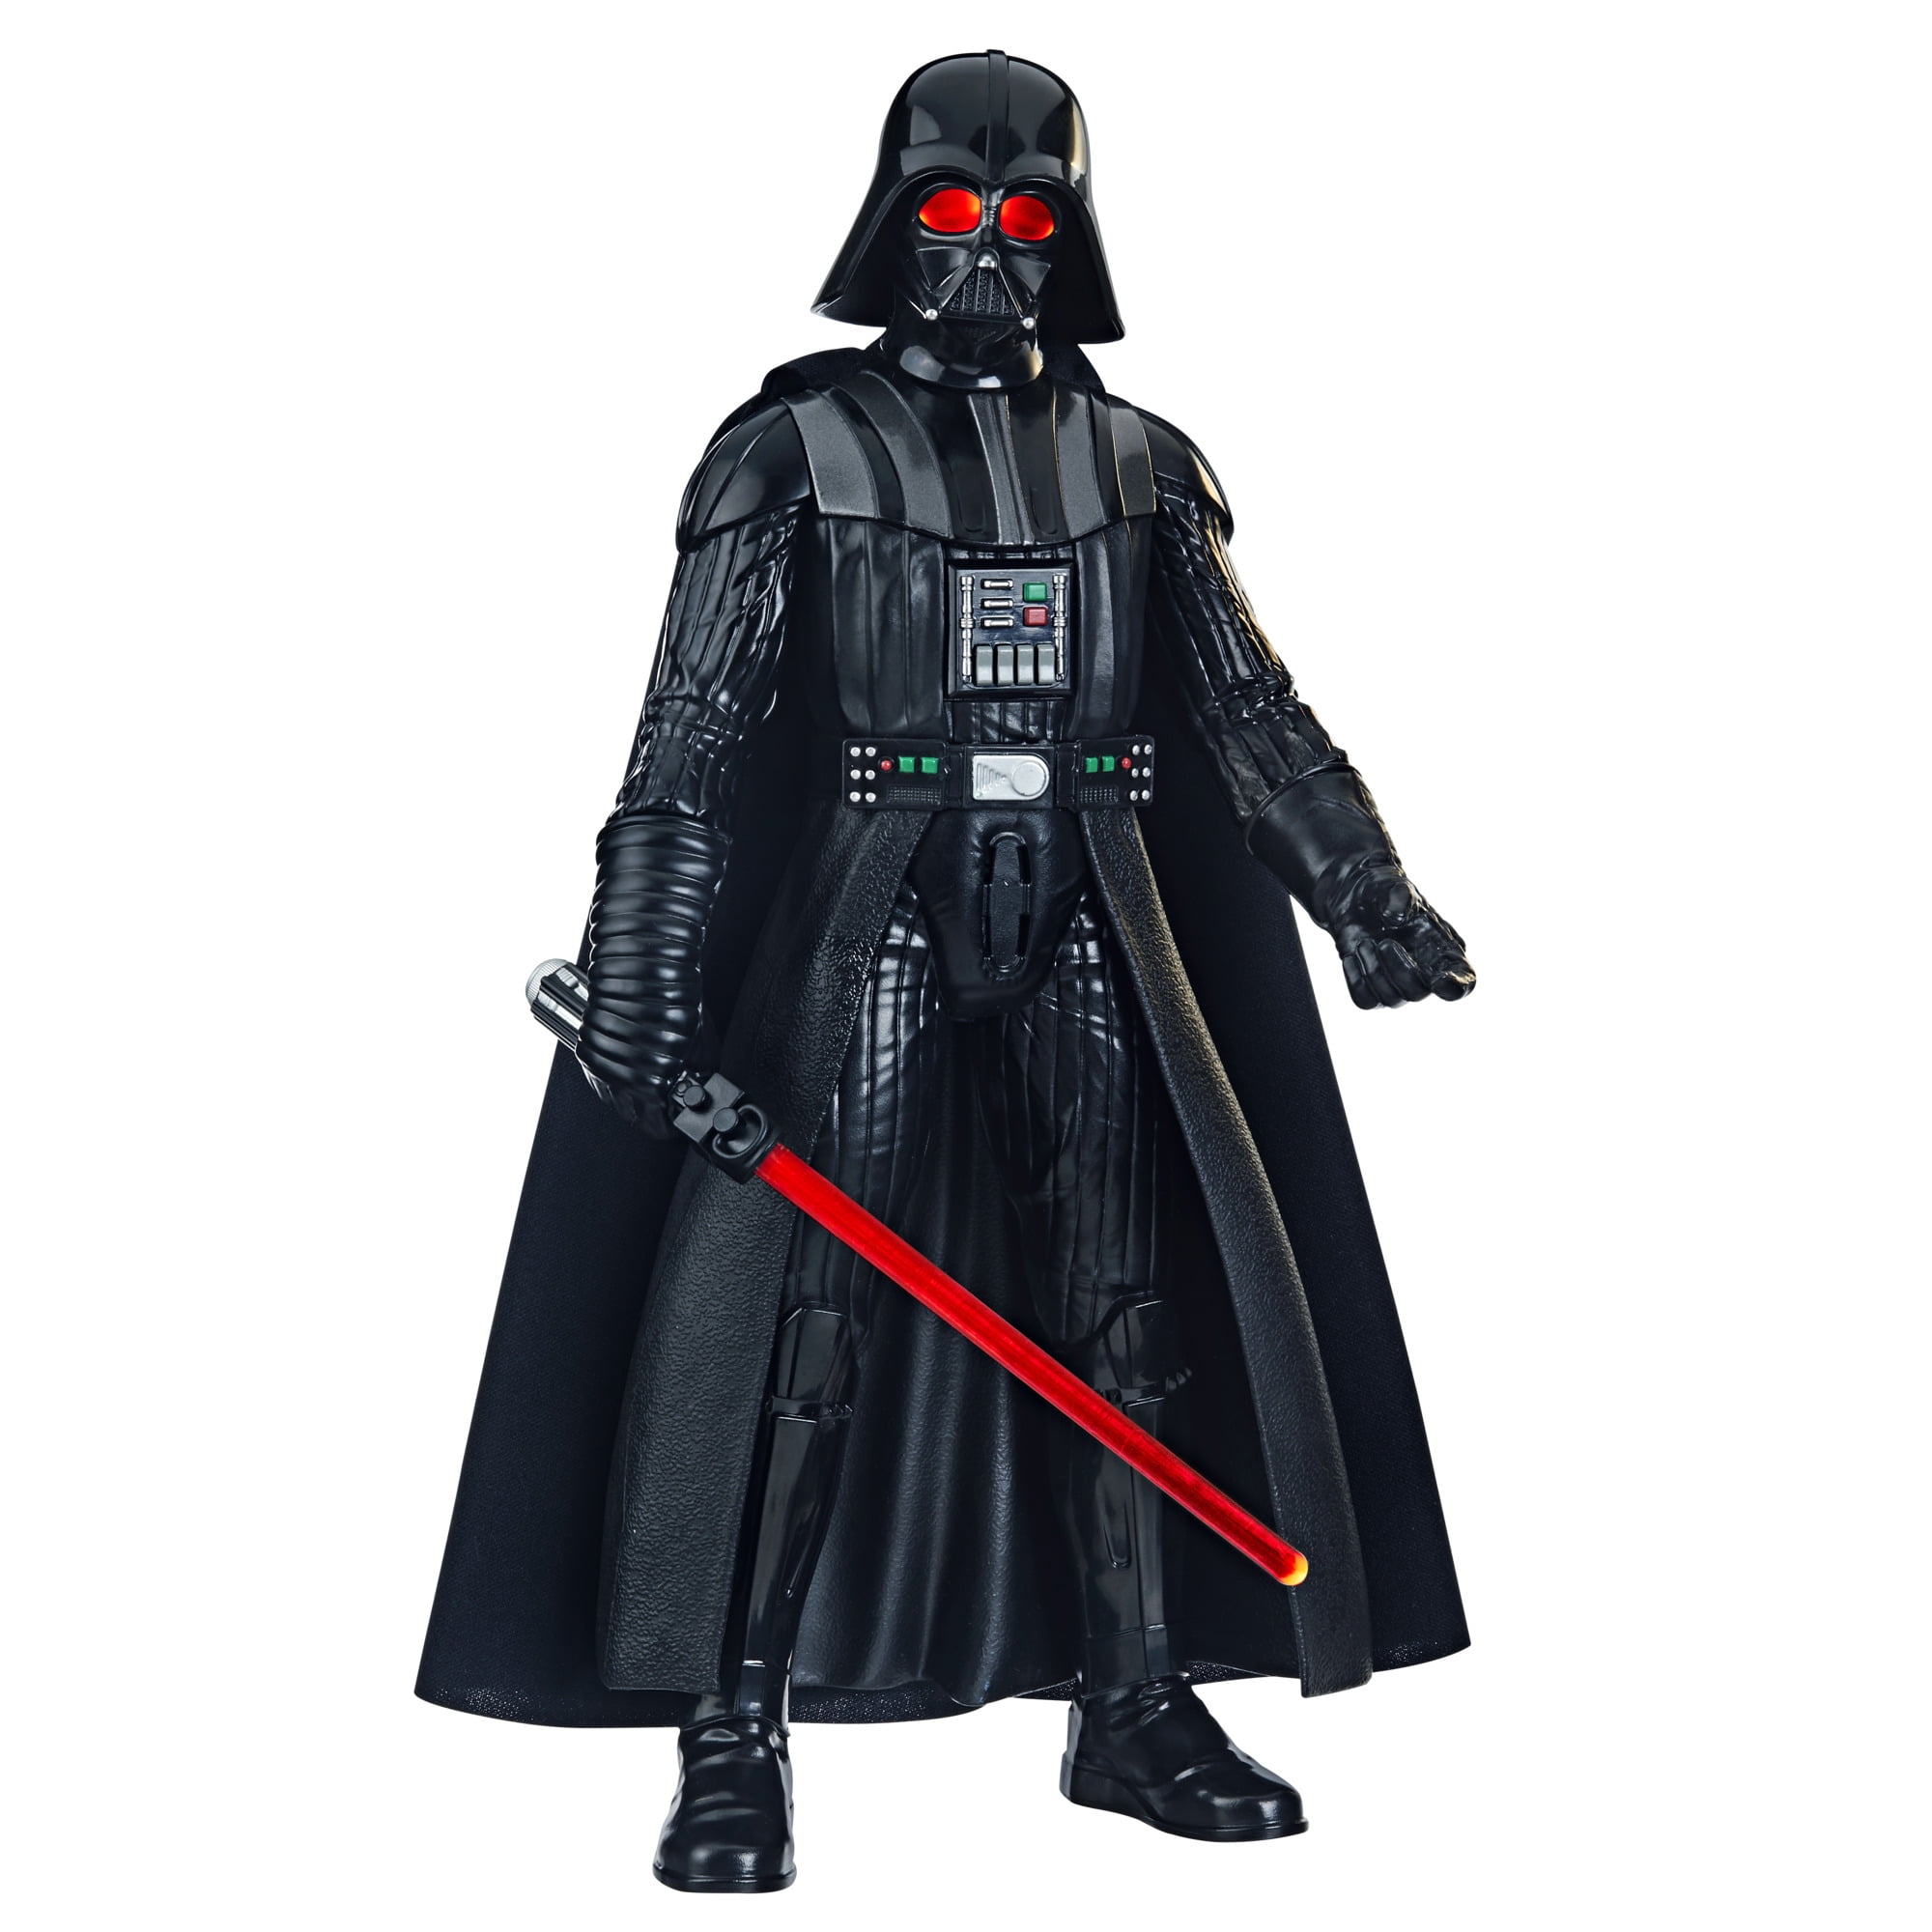 Star Wars Galactic Action Darth Vader Interactive Electronic 12-Inch-Scale Action Figure